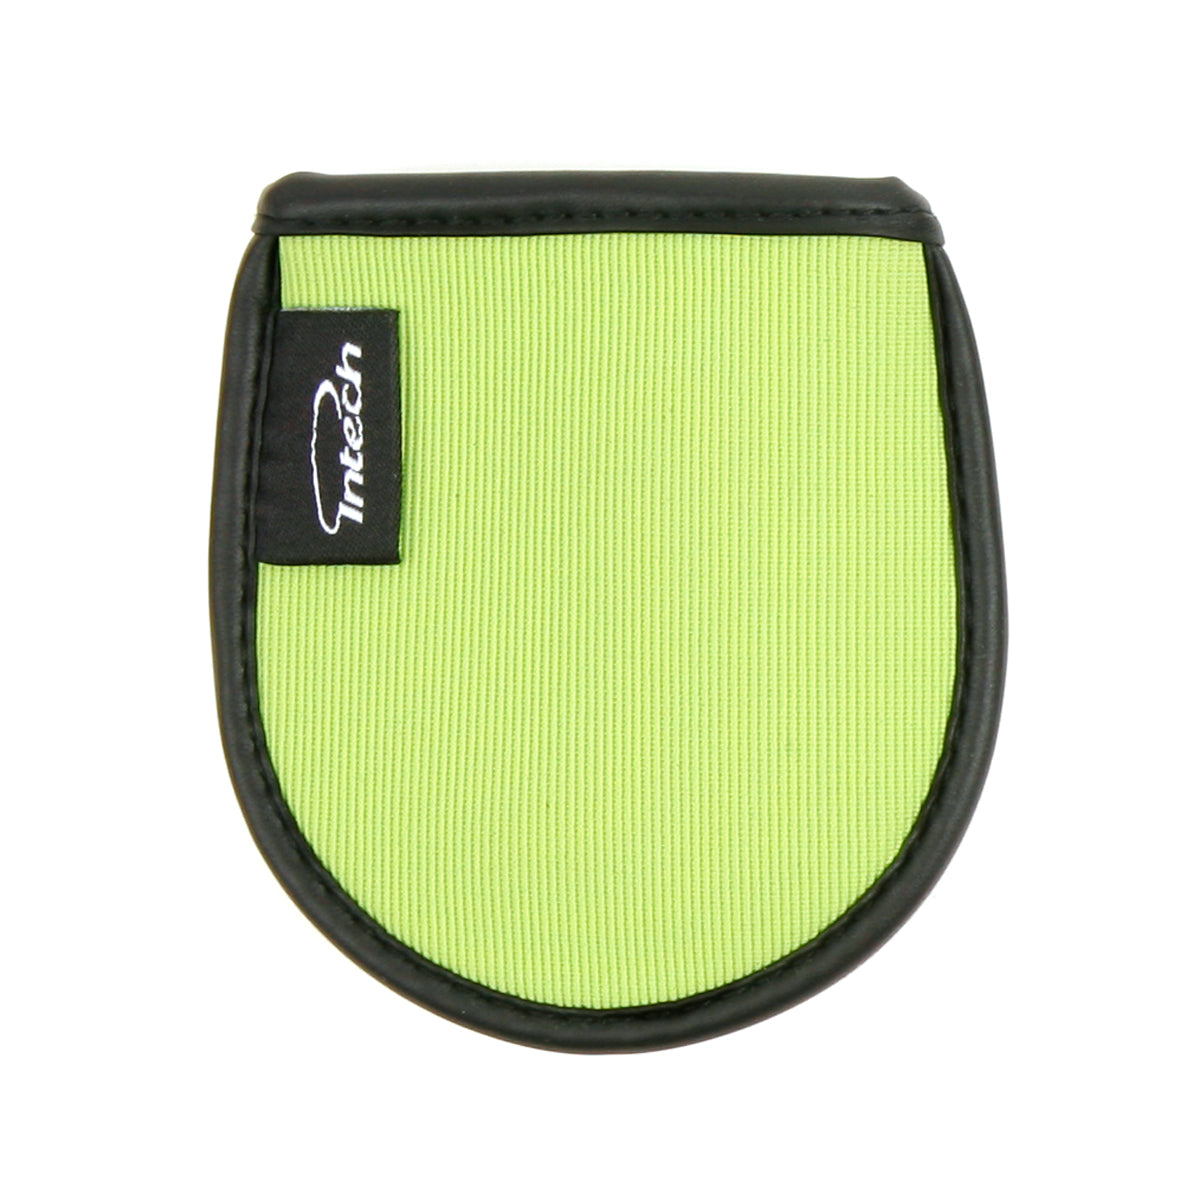 lime green Intech Squeaky Clean Pocket Golf Ball Washer